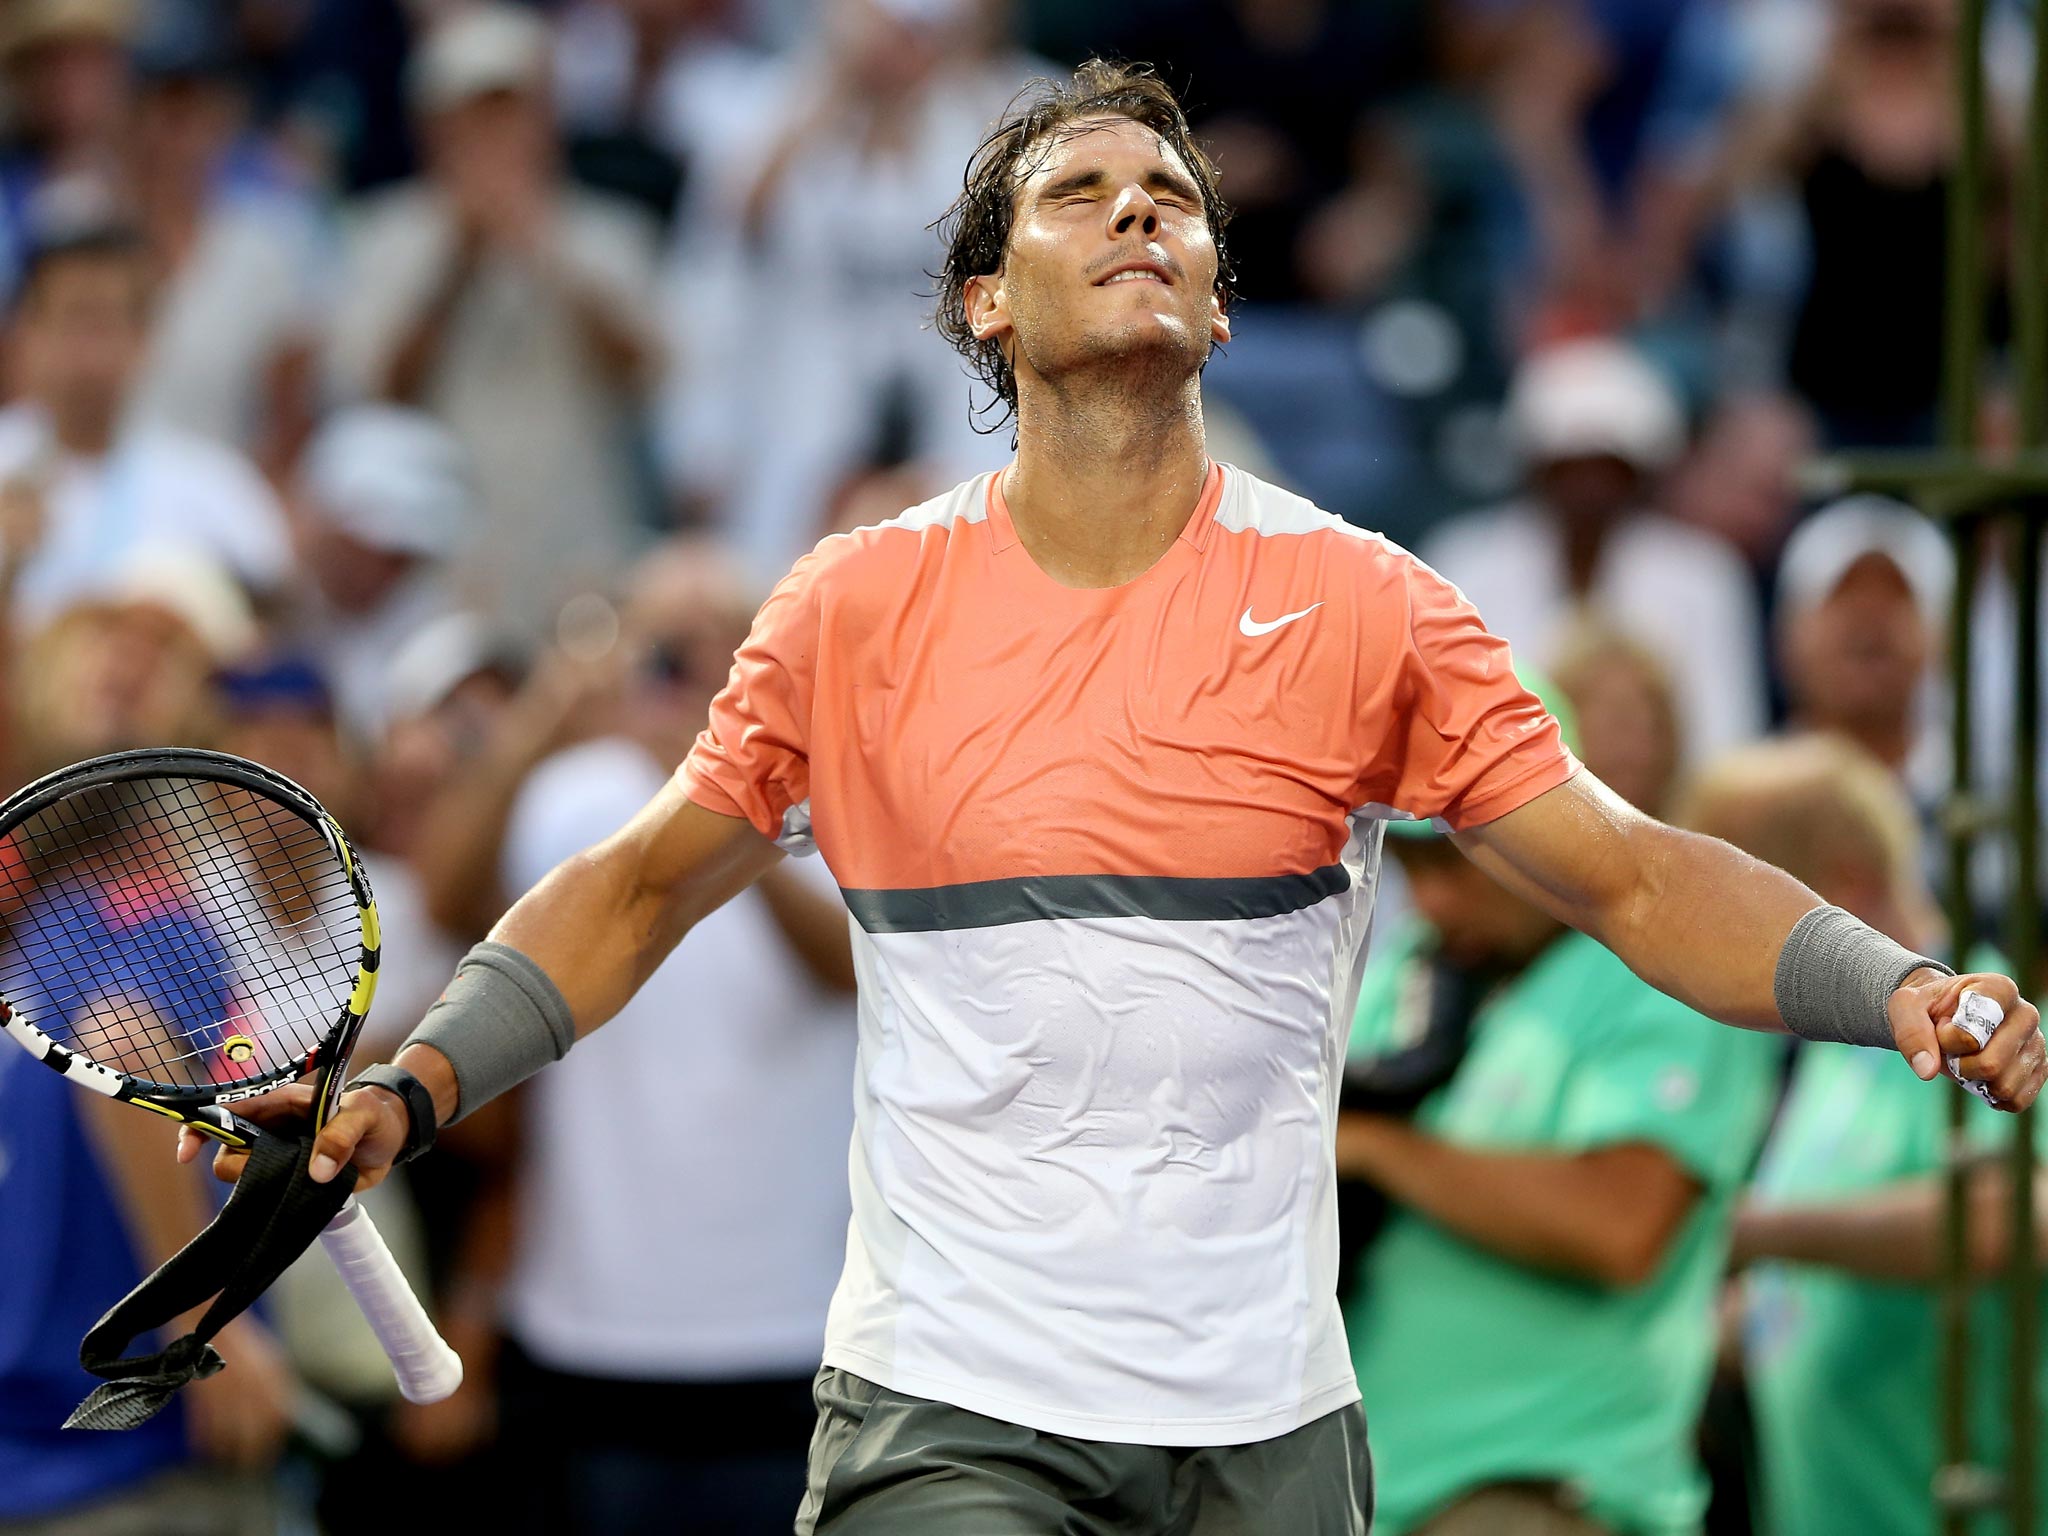 Rafael Nadal dropped just one game as he crushed Denis Istoman 6-1 6-0